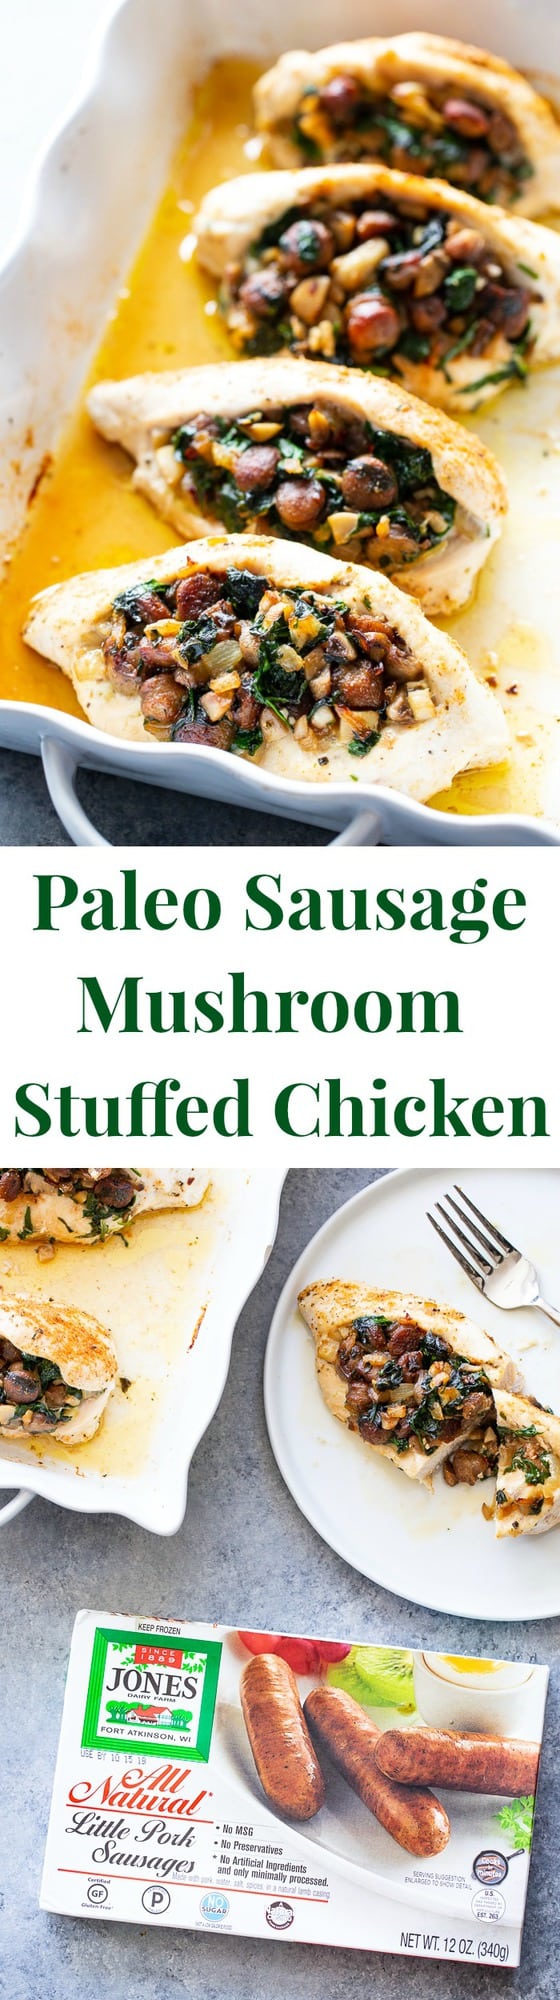 Pinterest: This stuffed chicken is loaded with all your favorite things!  Savory sausage, mushroom, and spinach stuffing baked in seasoned chicken breasts makes this a protein packed, filling meal that’s Paleo, Whole30 and keto friendly!  #AD #JonesDairyFarm